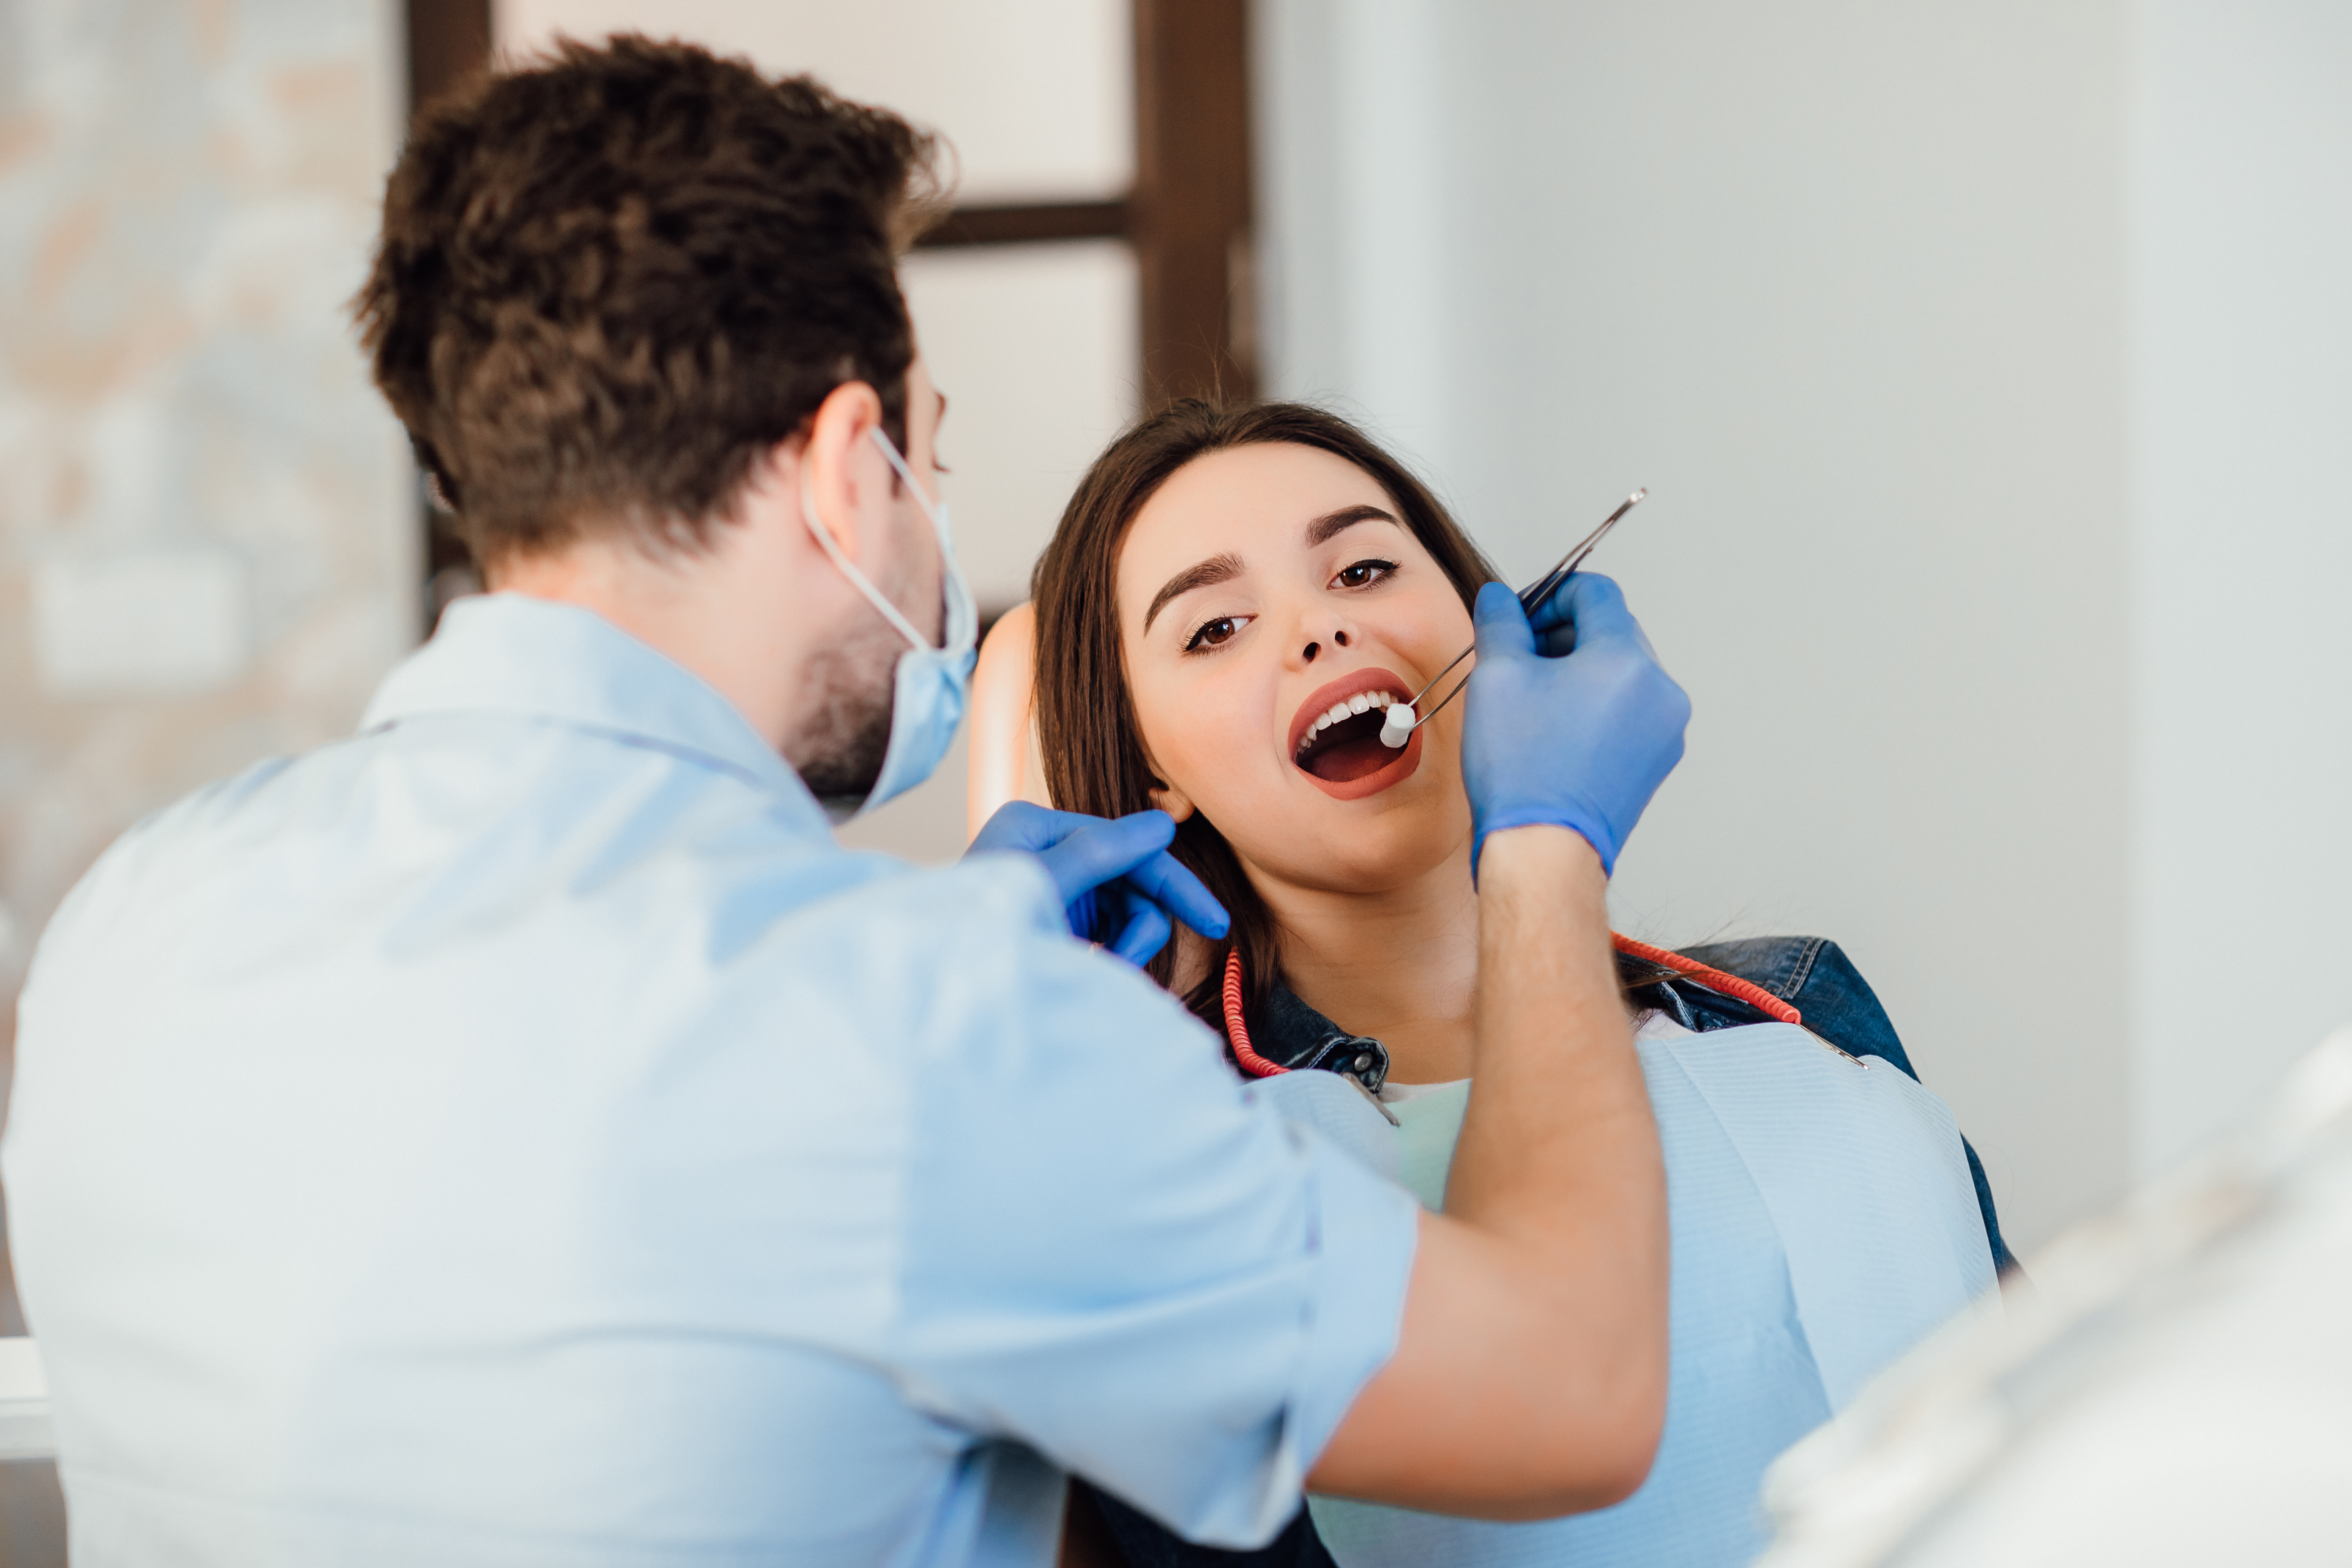 dentist-making-professional-teeth-cleaning-withb-the-cotton-female-young-patient-at-the-dental-office